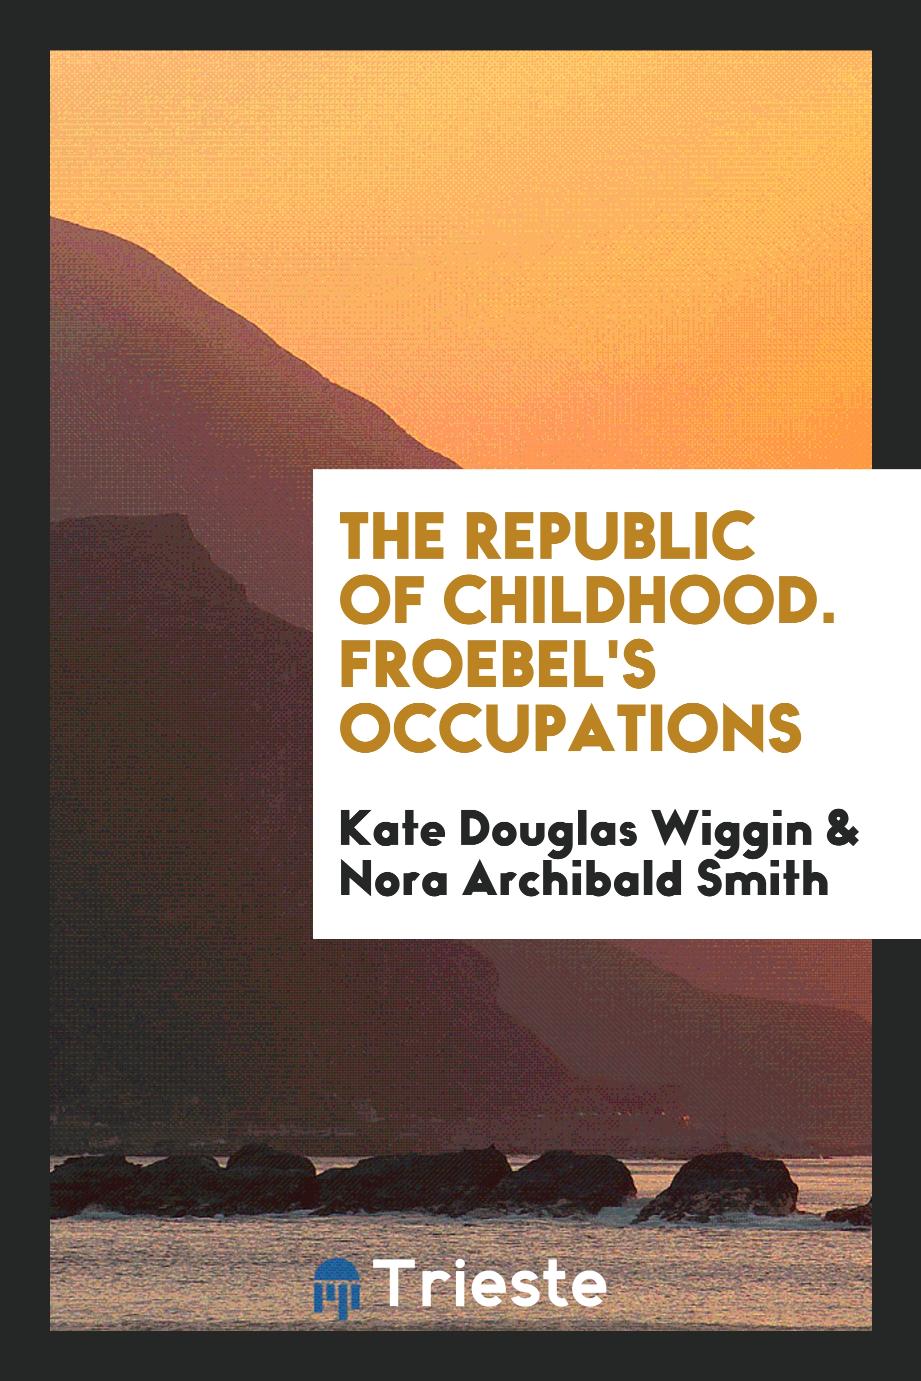 The Republic of Childhood. Froebel's Occupations